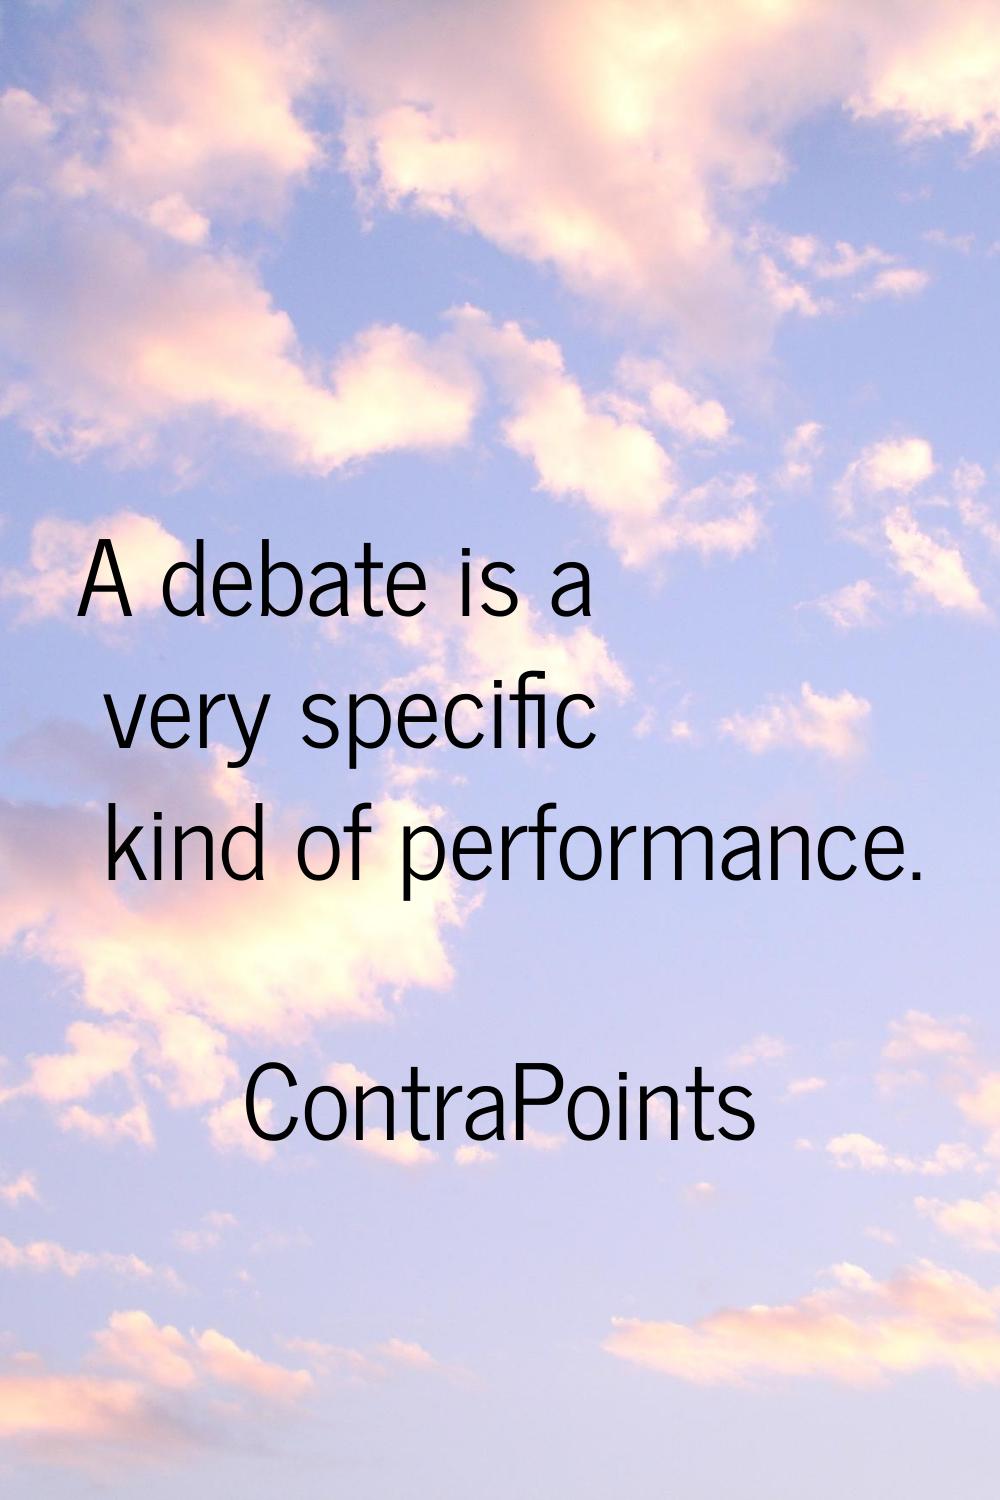 A debate is a very specific kind of performance.